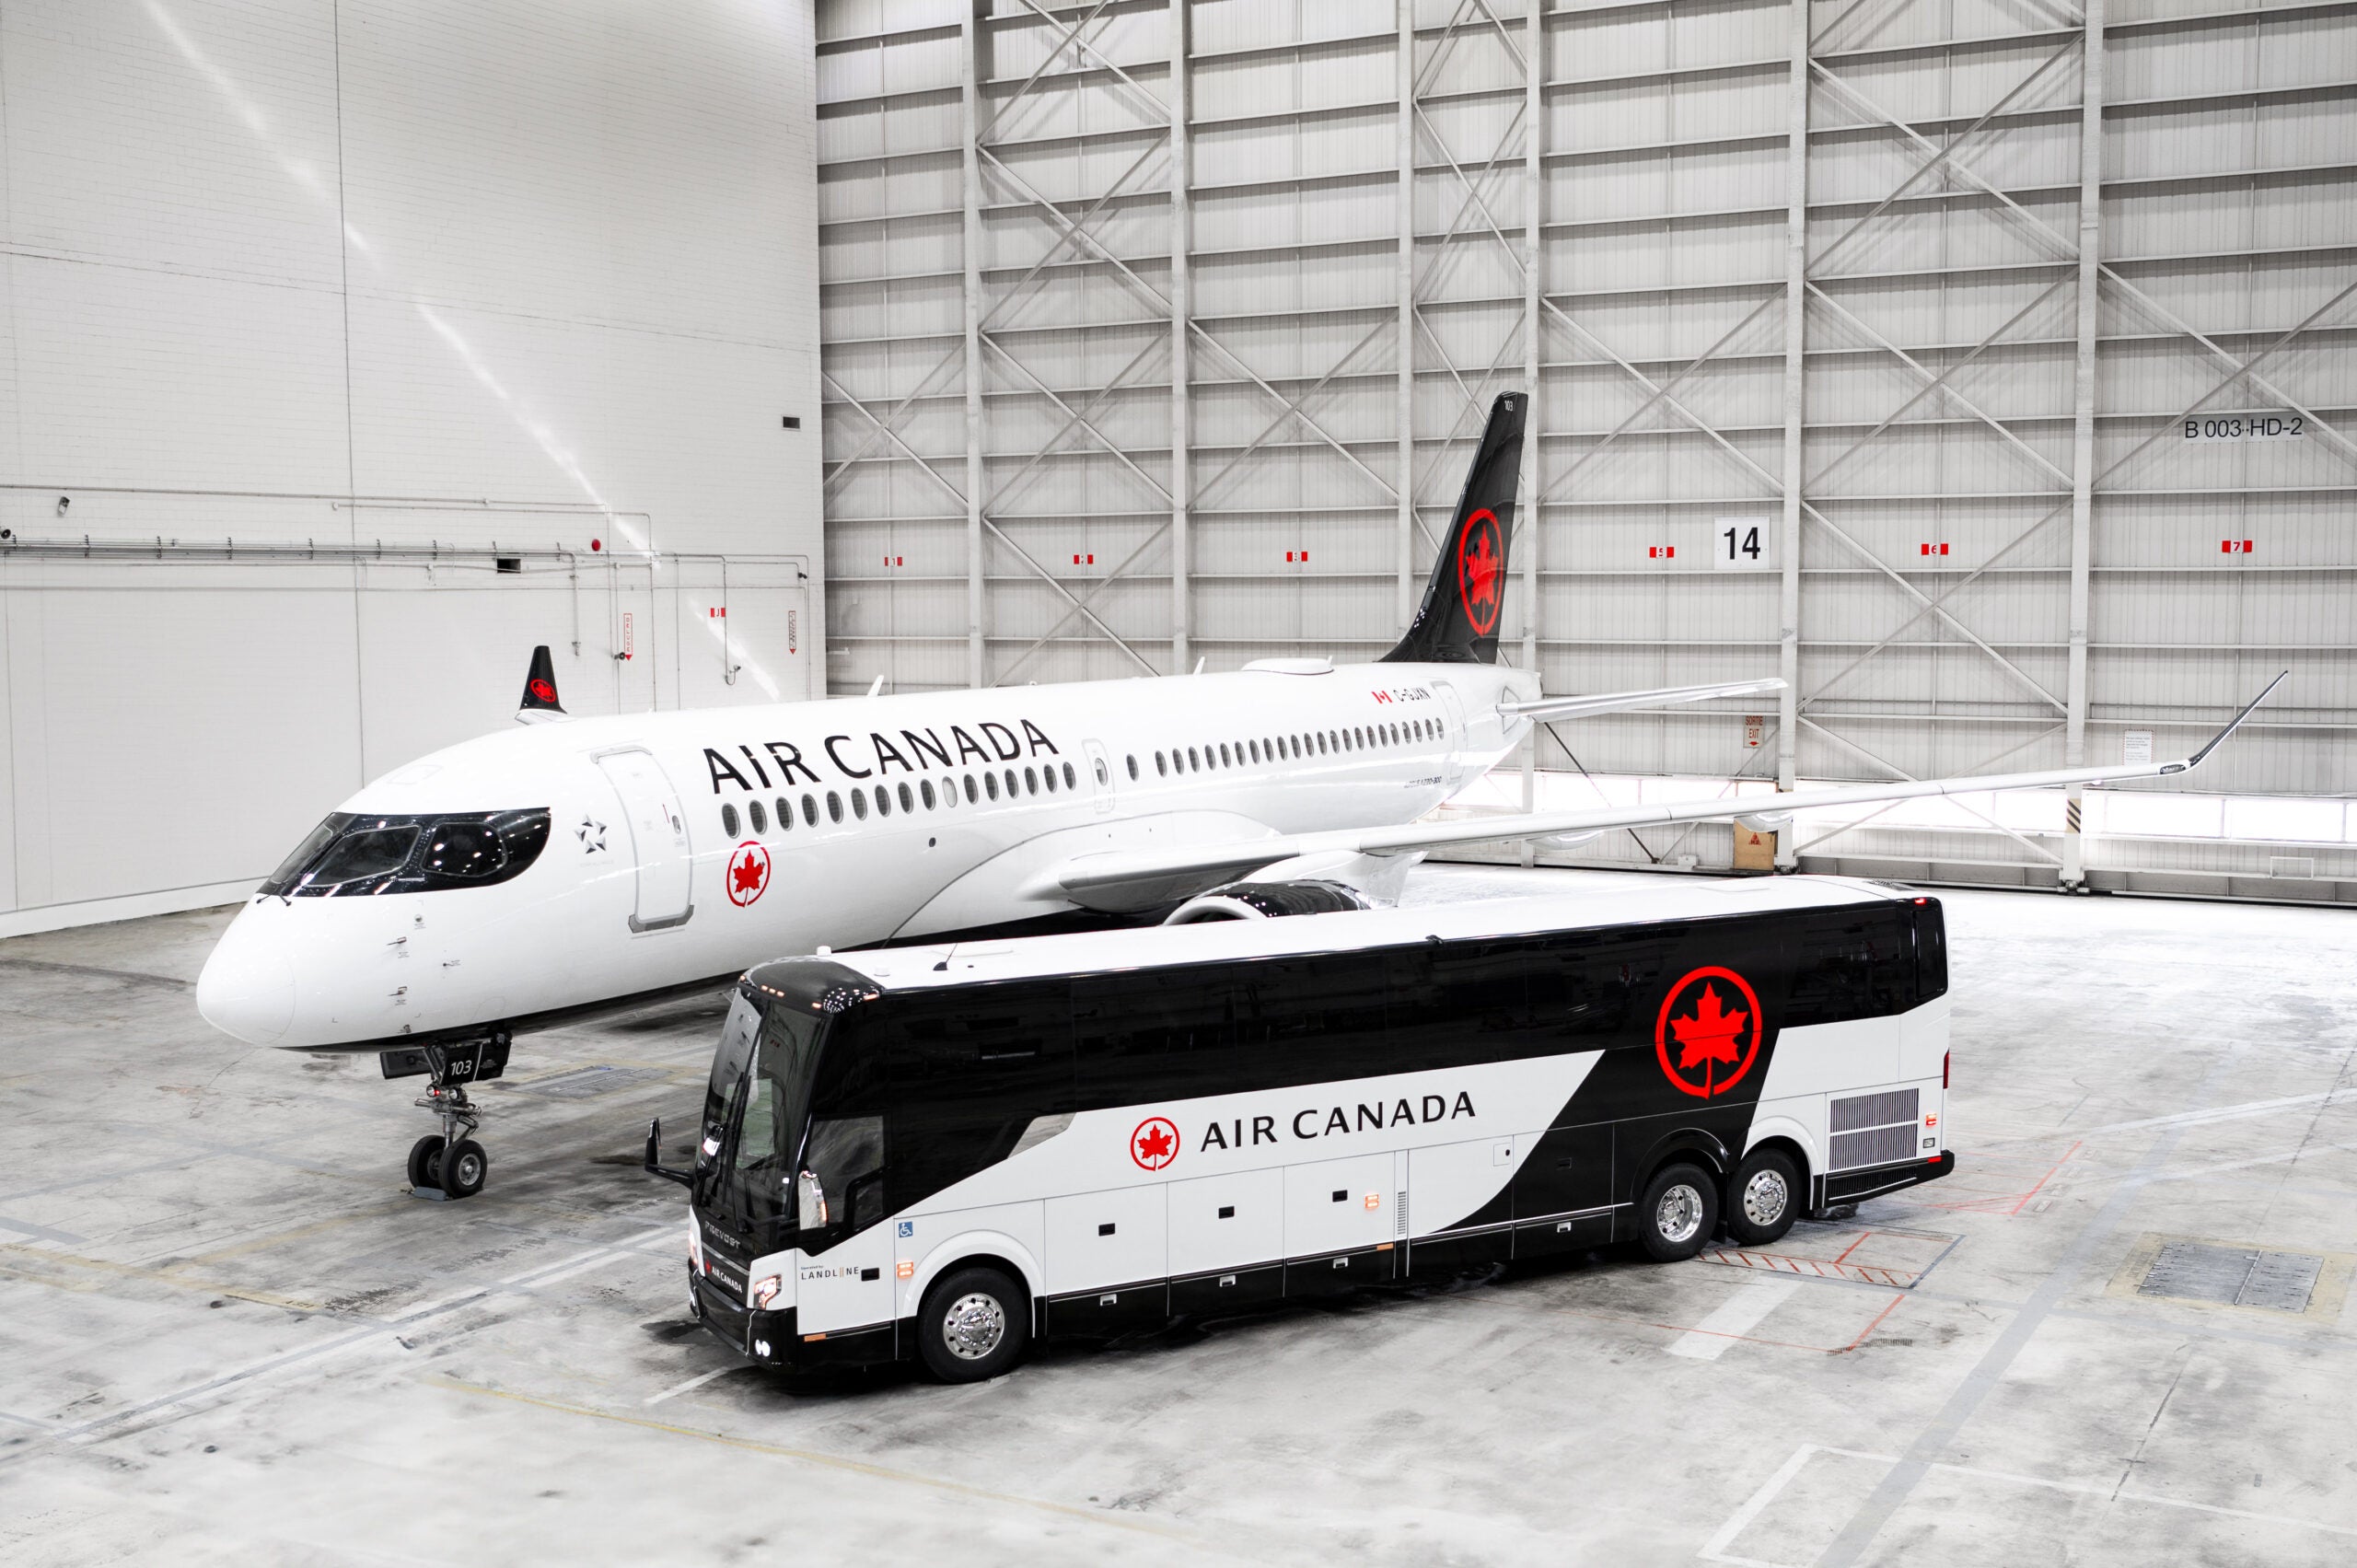 Air Canada expands Toronto hub with 2 new Landline bus locations